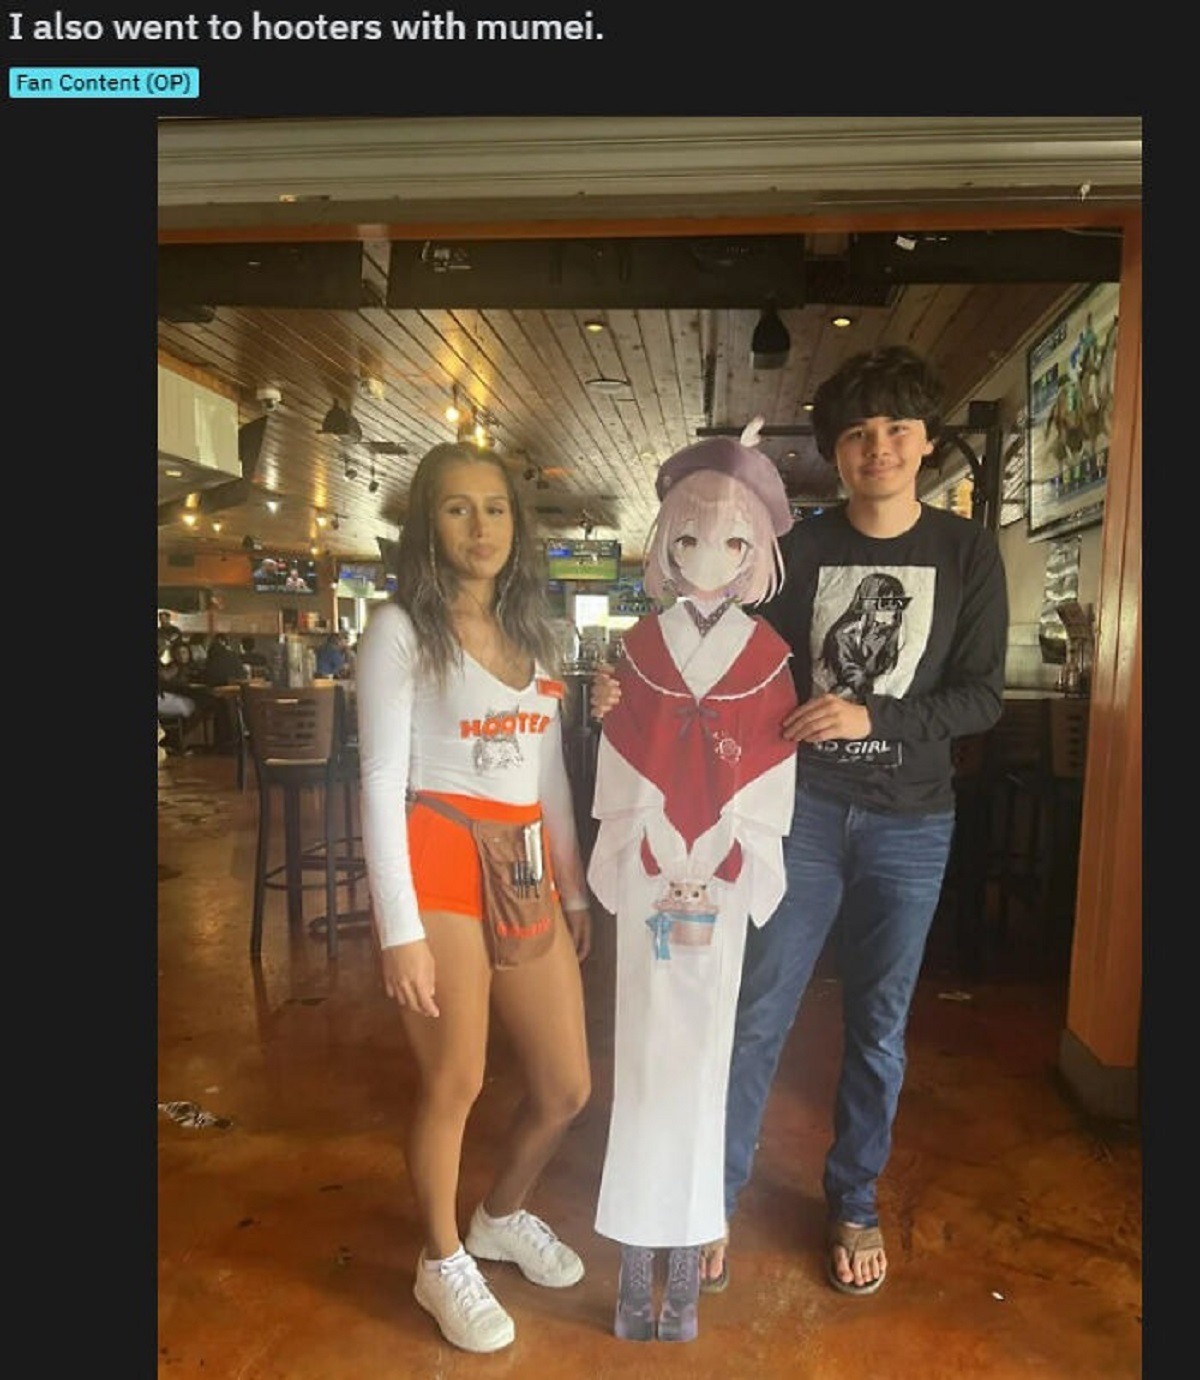 cringe pics - mumei hooters - I also went to hooters with mumei. Fan Content Op Fless And Girl